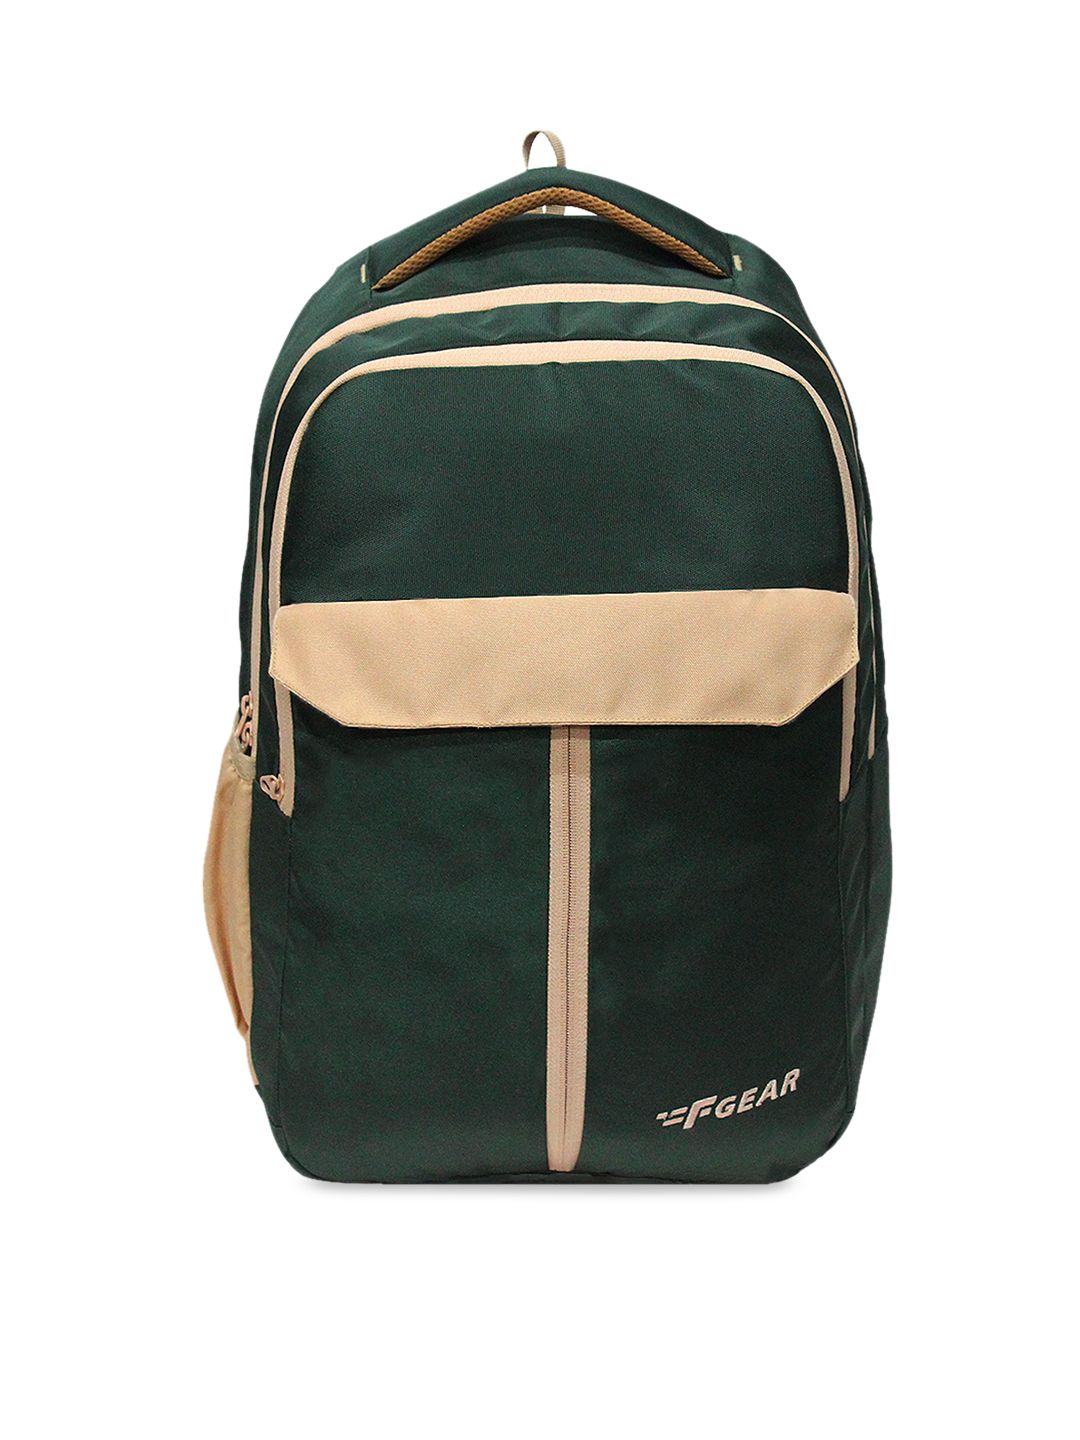 F Gear Unisex Olive Green & Beige Solid Backpack Price in India